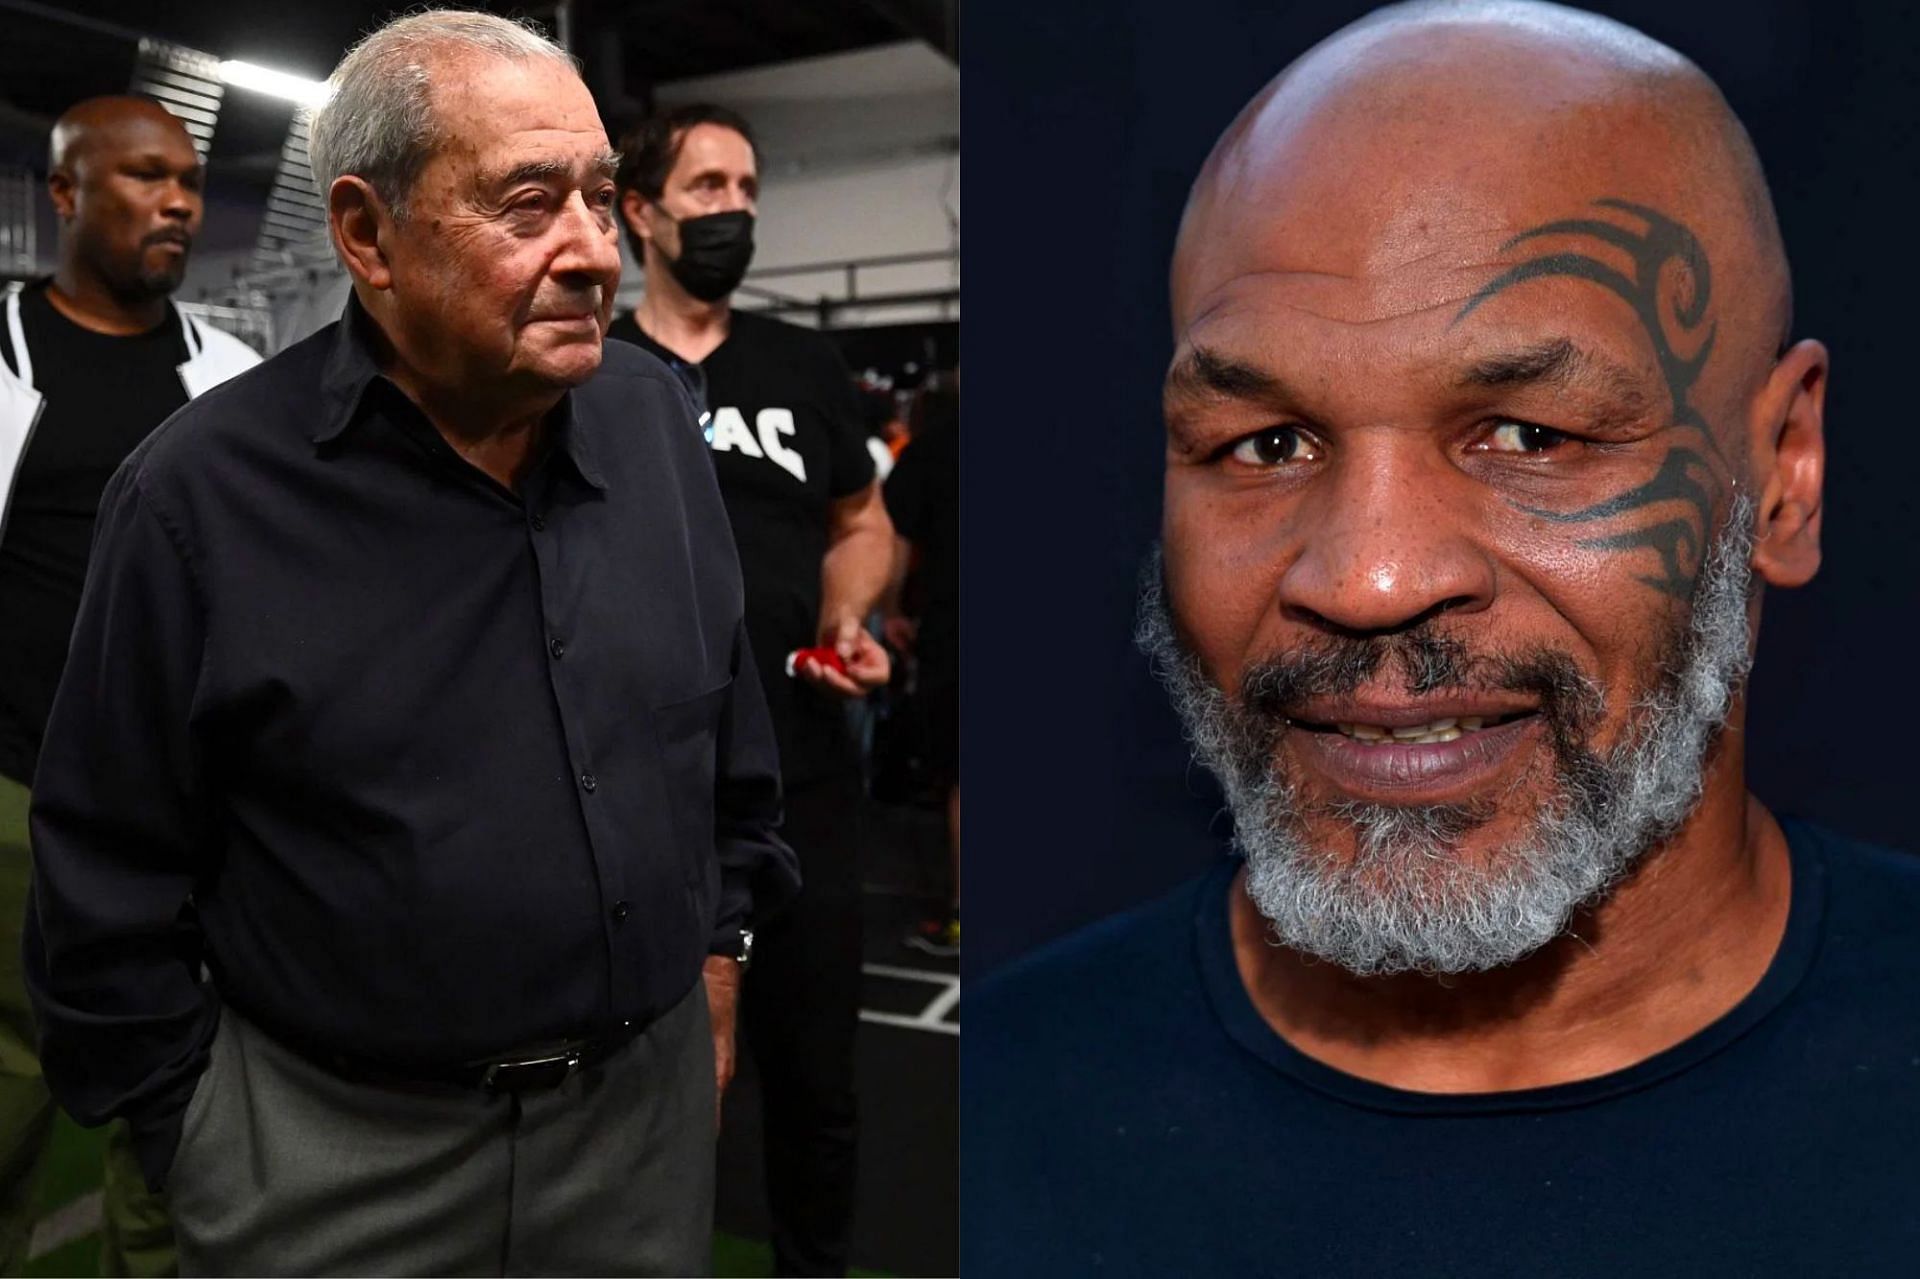 Bob Arum (L) and Mike Tyson (R)